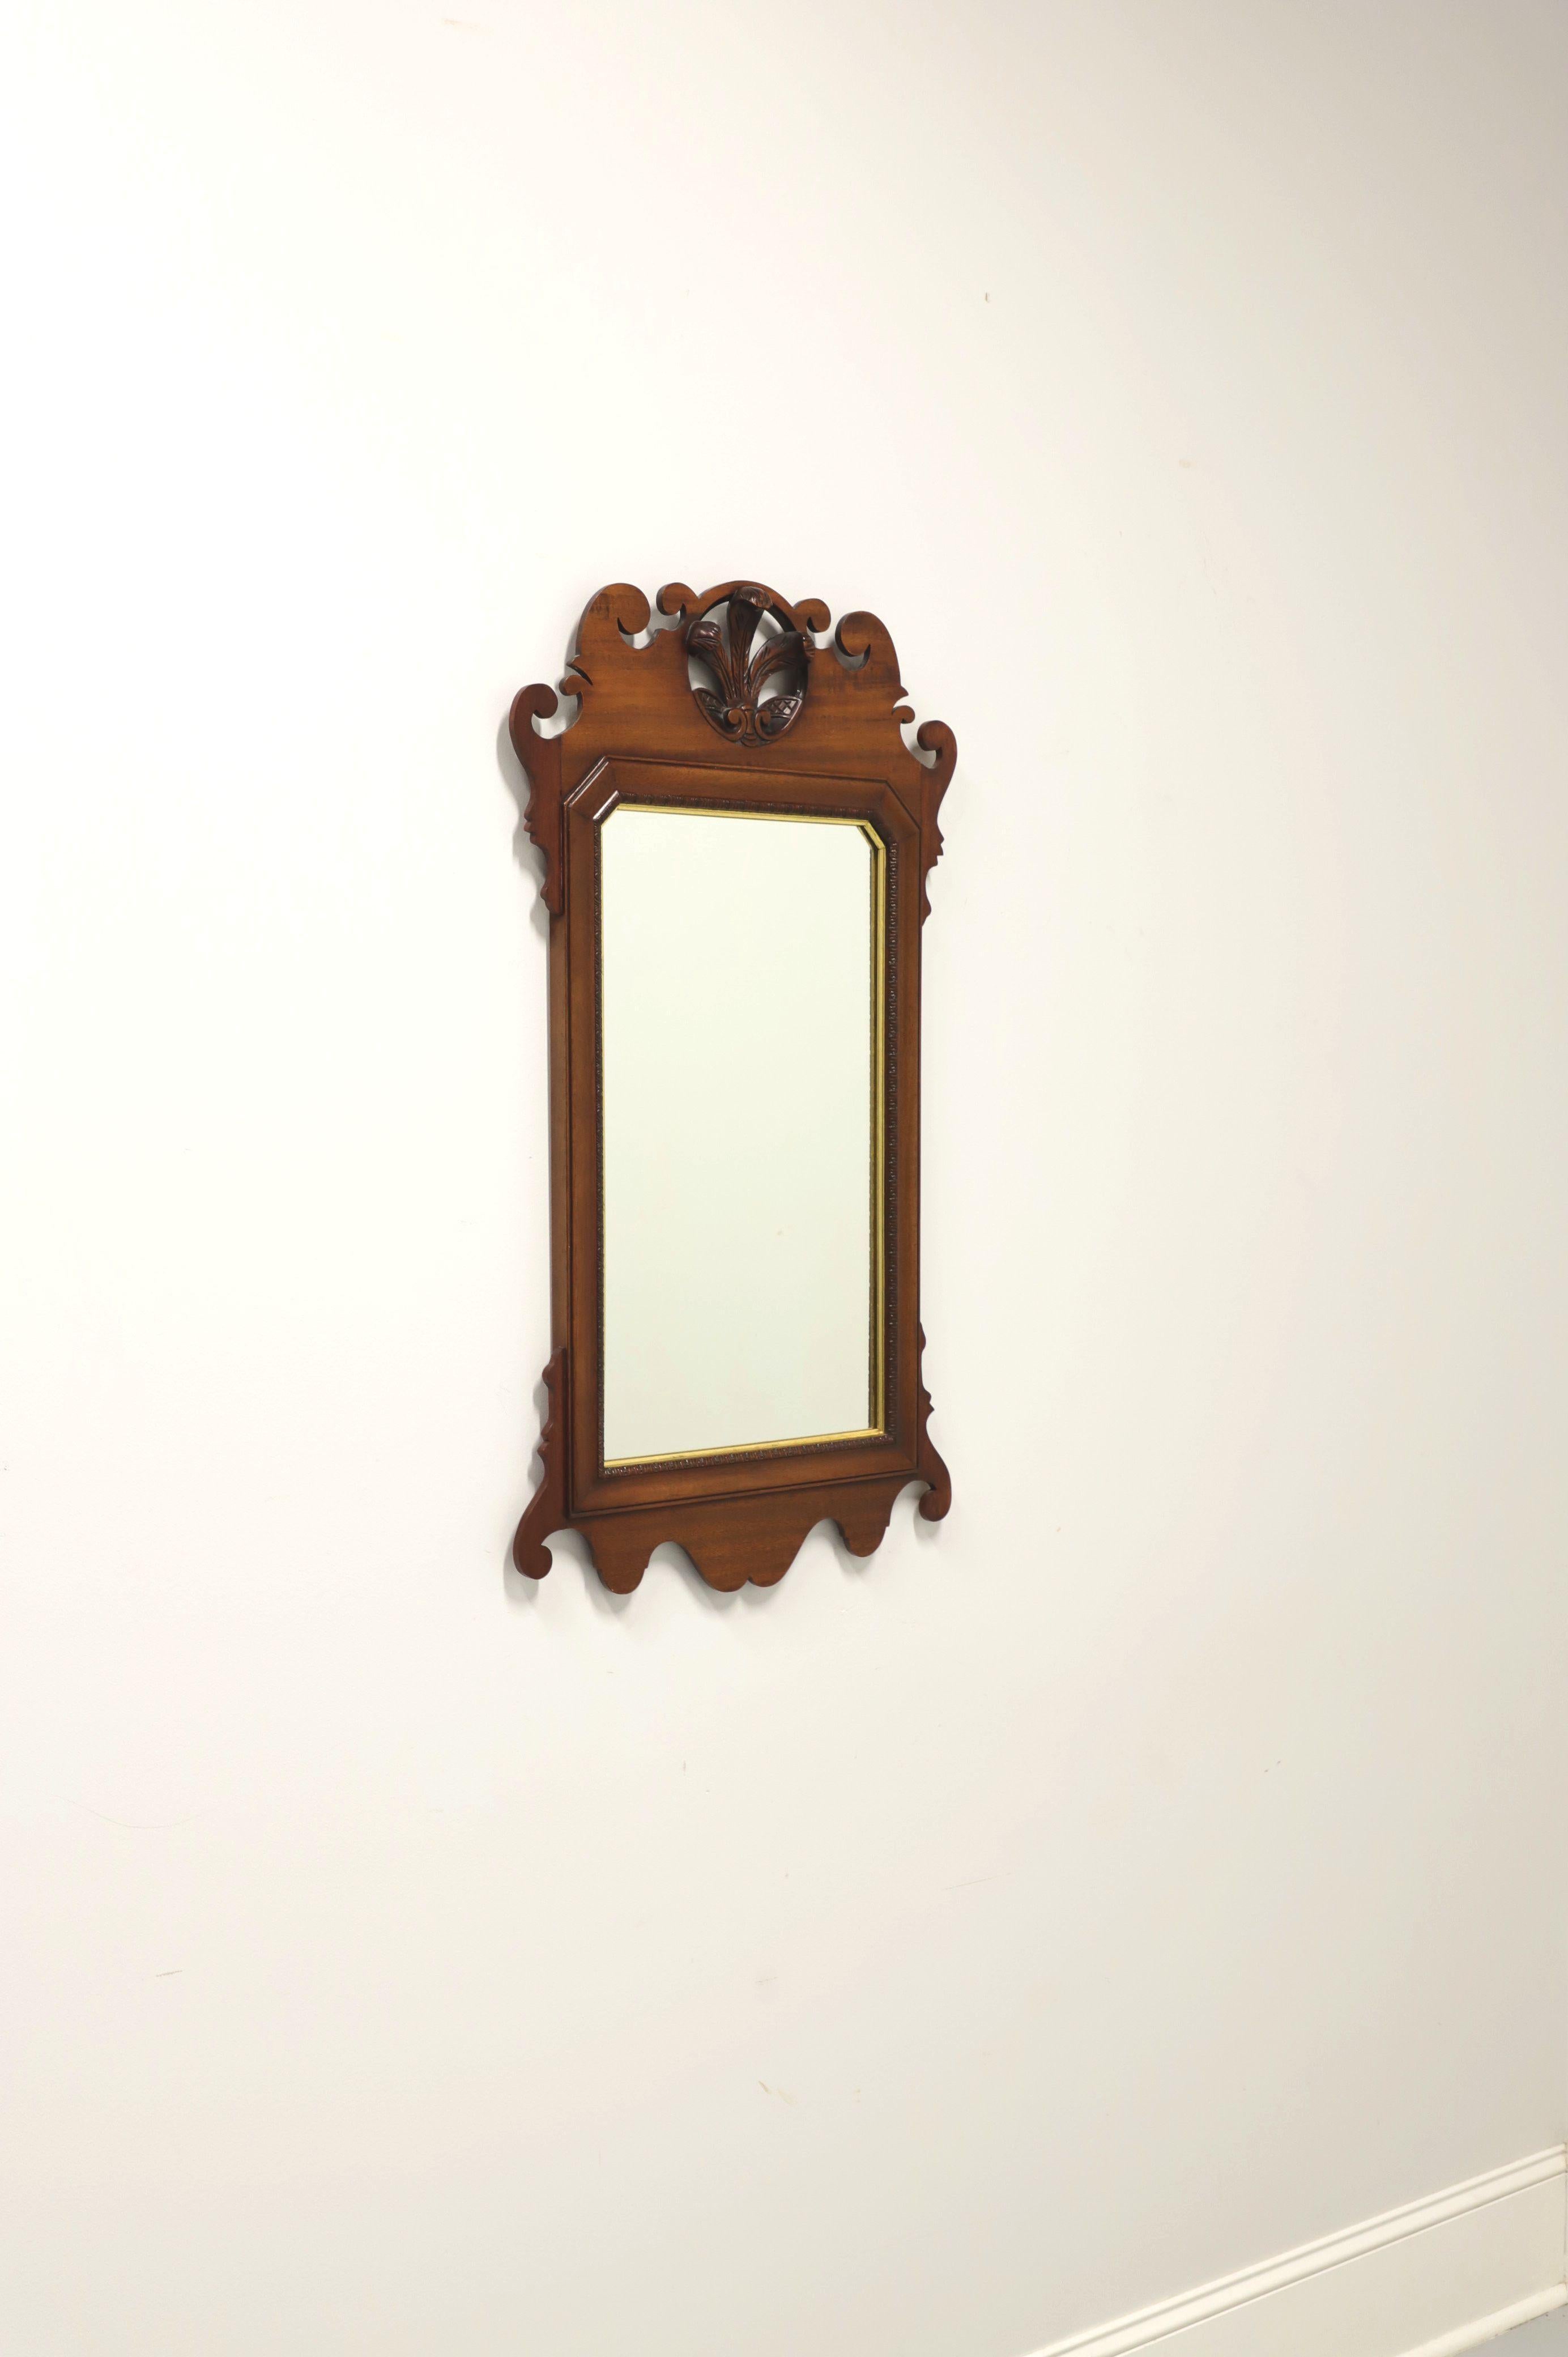 A Chippendale style wall mirror, unbranded, similar in quality to Henkel Harris or Henredon. Mirrored glass, mahogany frame with gold trim and top center Prince of Wales Plumes. Made in the USA, in the late 20th Century.

Measures: 20.5 W 1 D 36.75